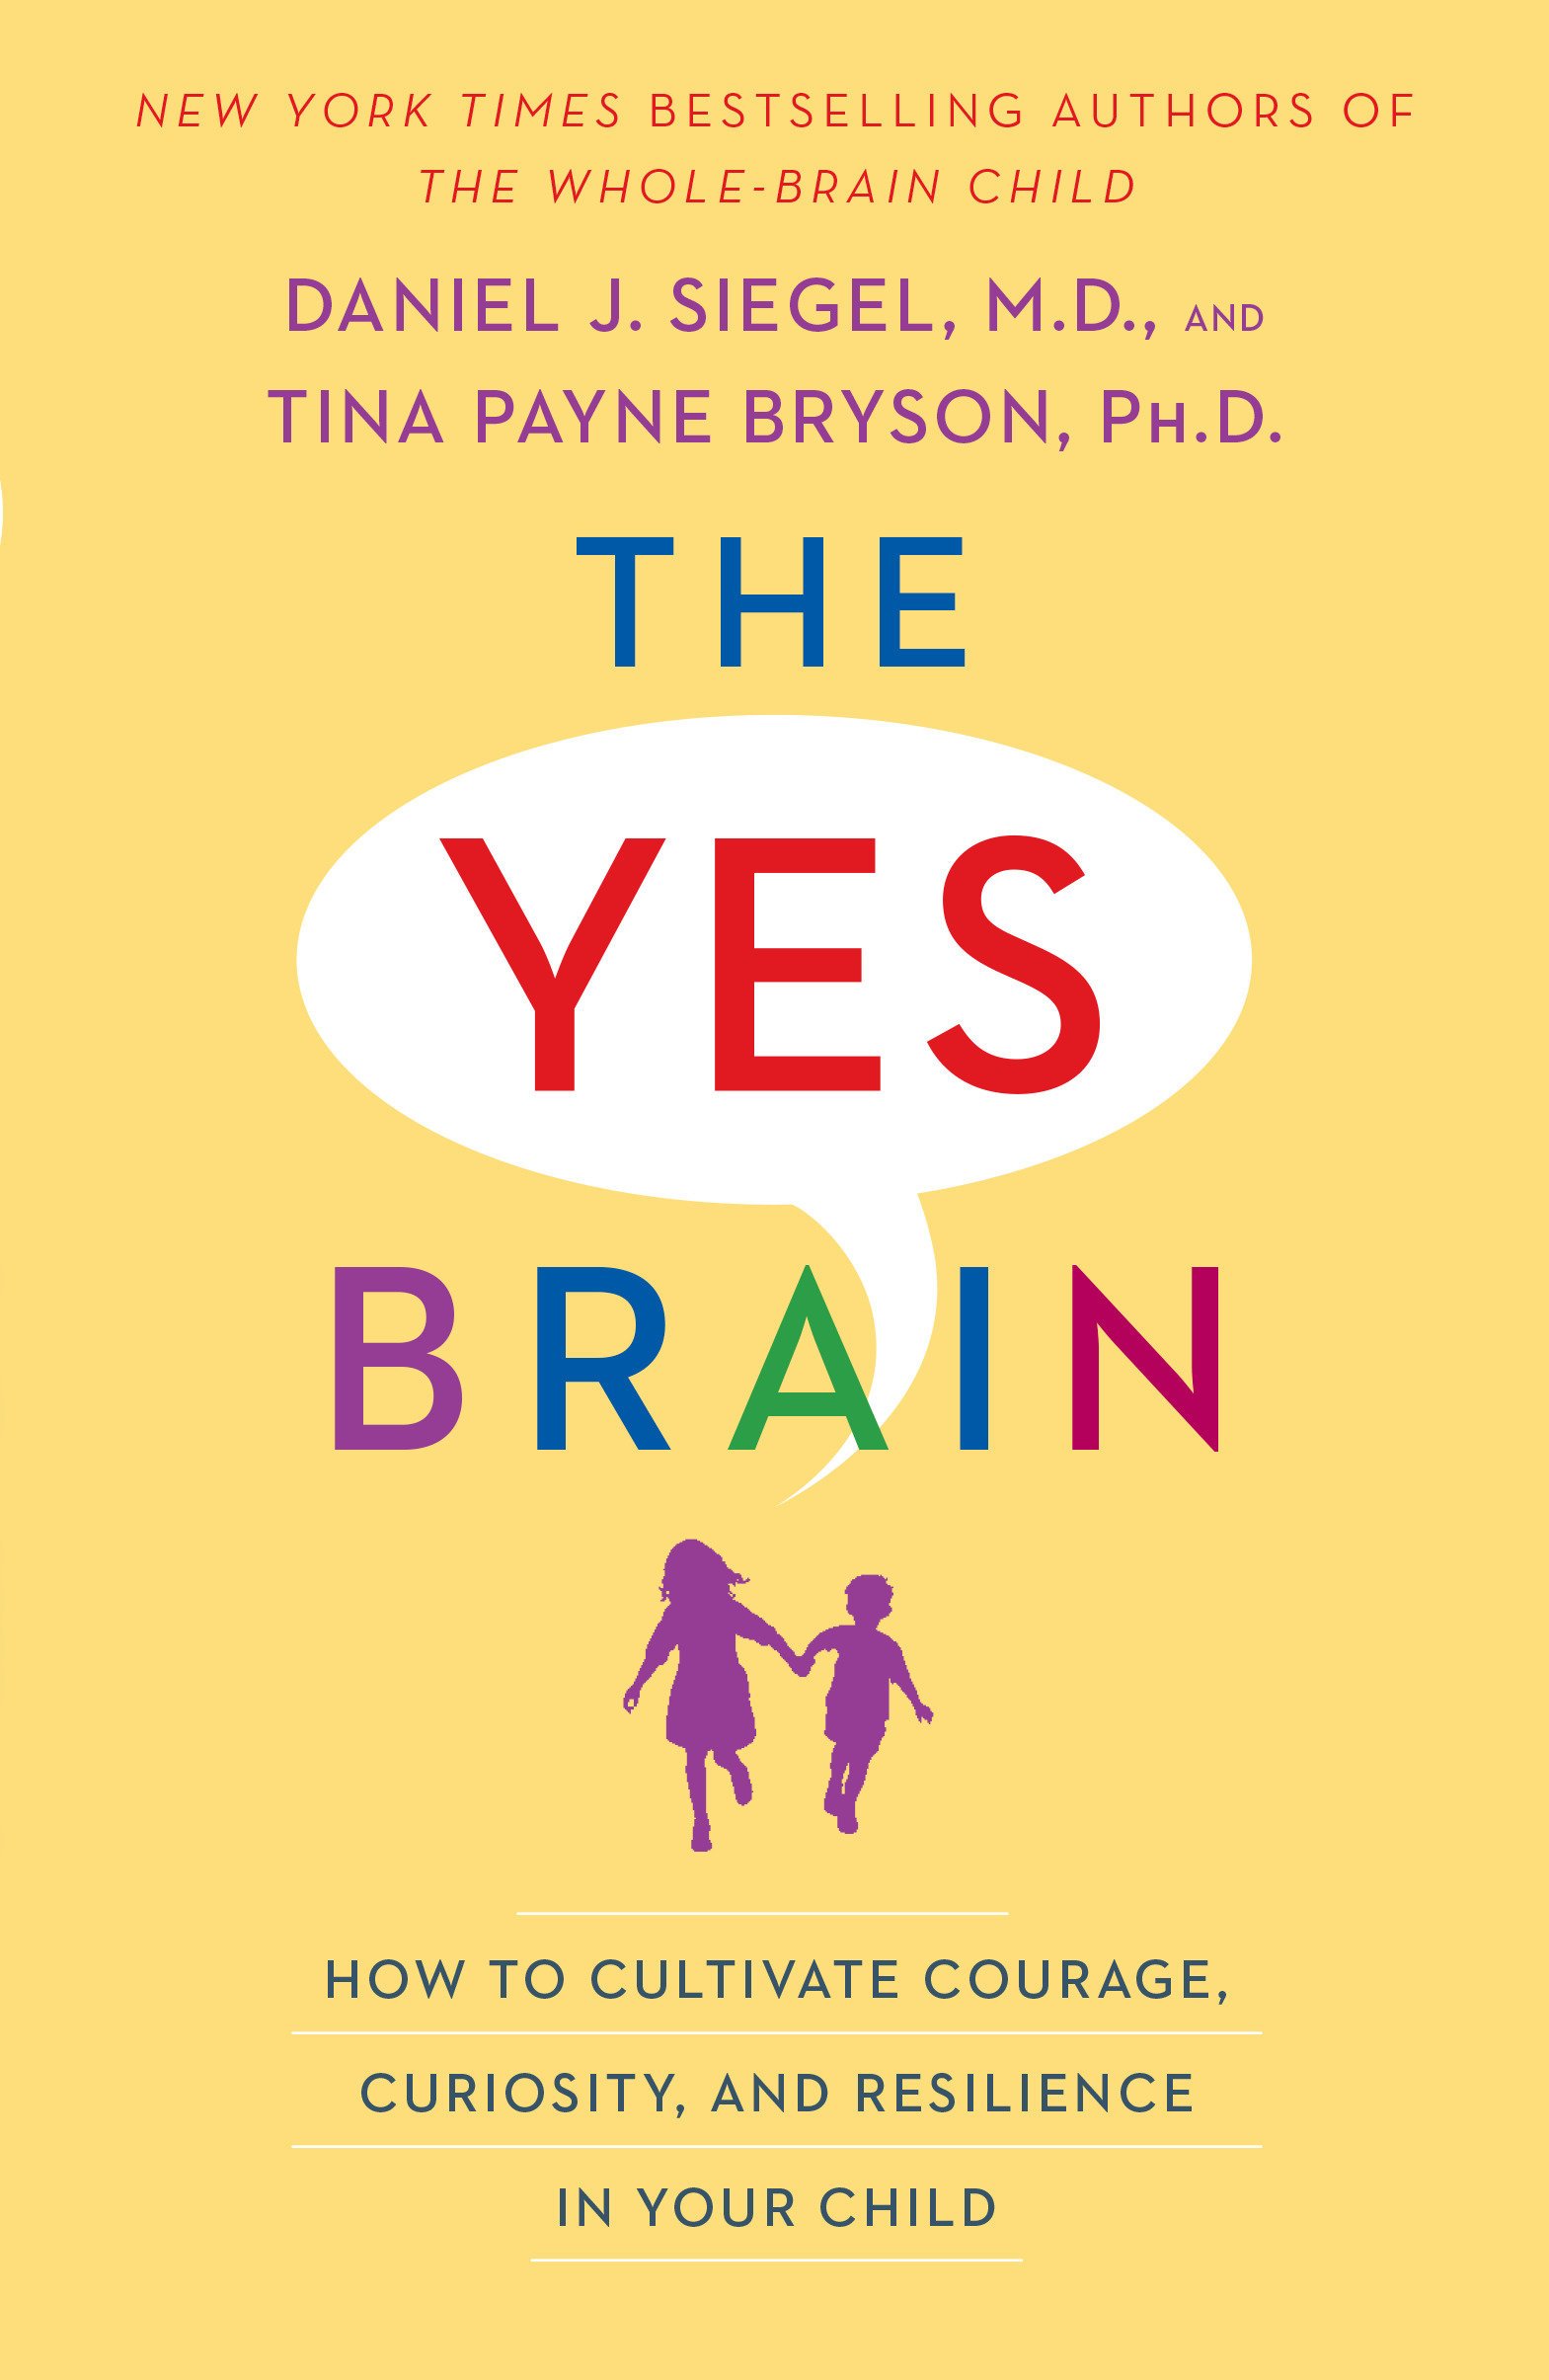 The Yes Brain: How to Cultivate Courage, Curiosity, & Resilience in Your Child – Daniel J. Siegel, M.D., & Tina Payne Bryson, PhD